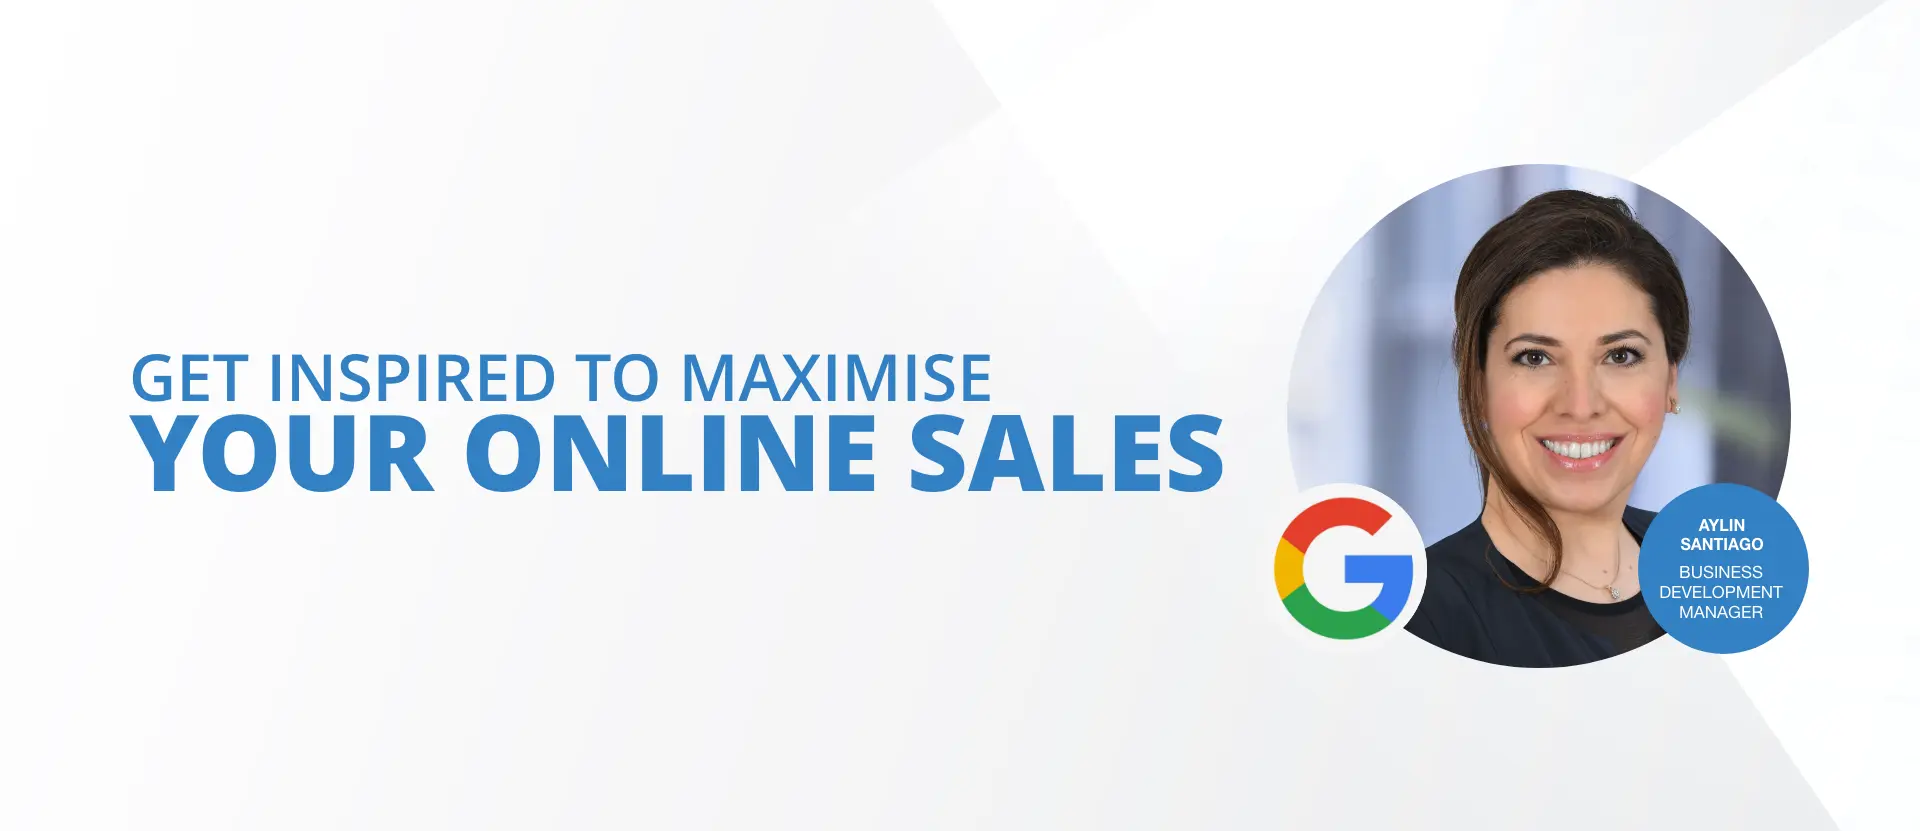 Get inspired to maximise your online sales